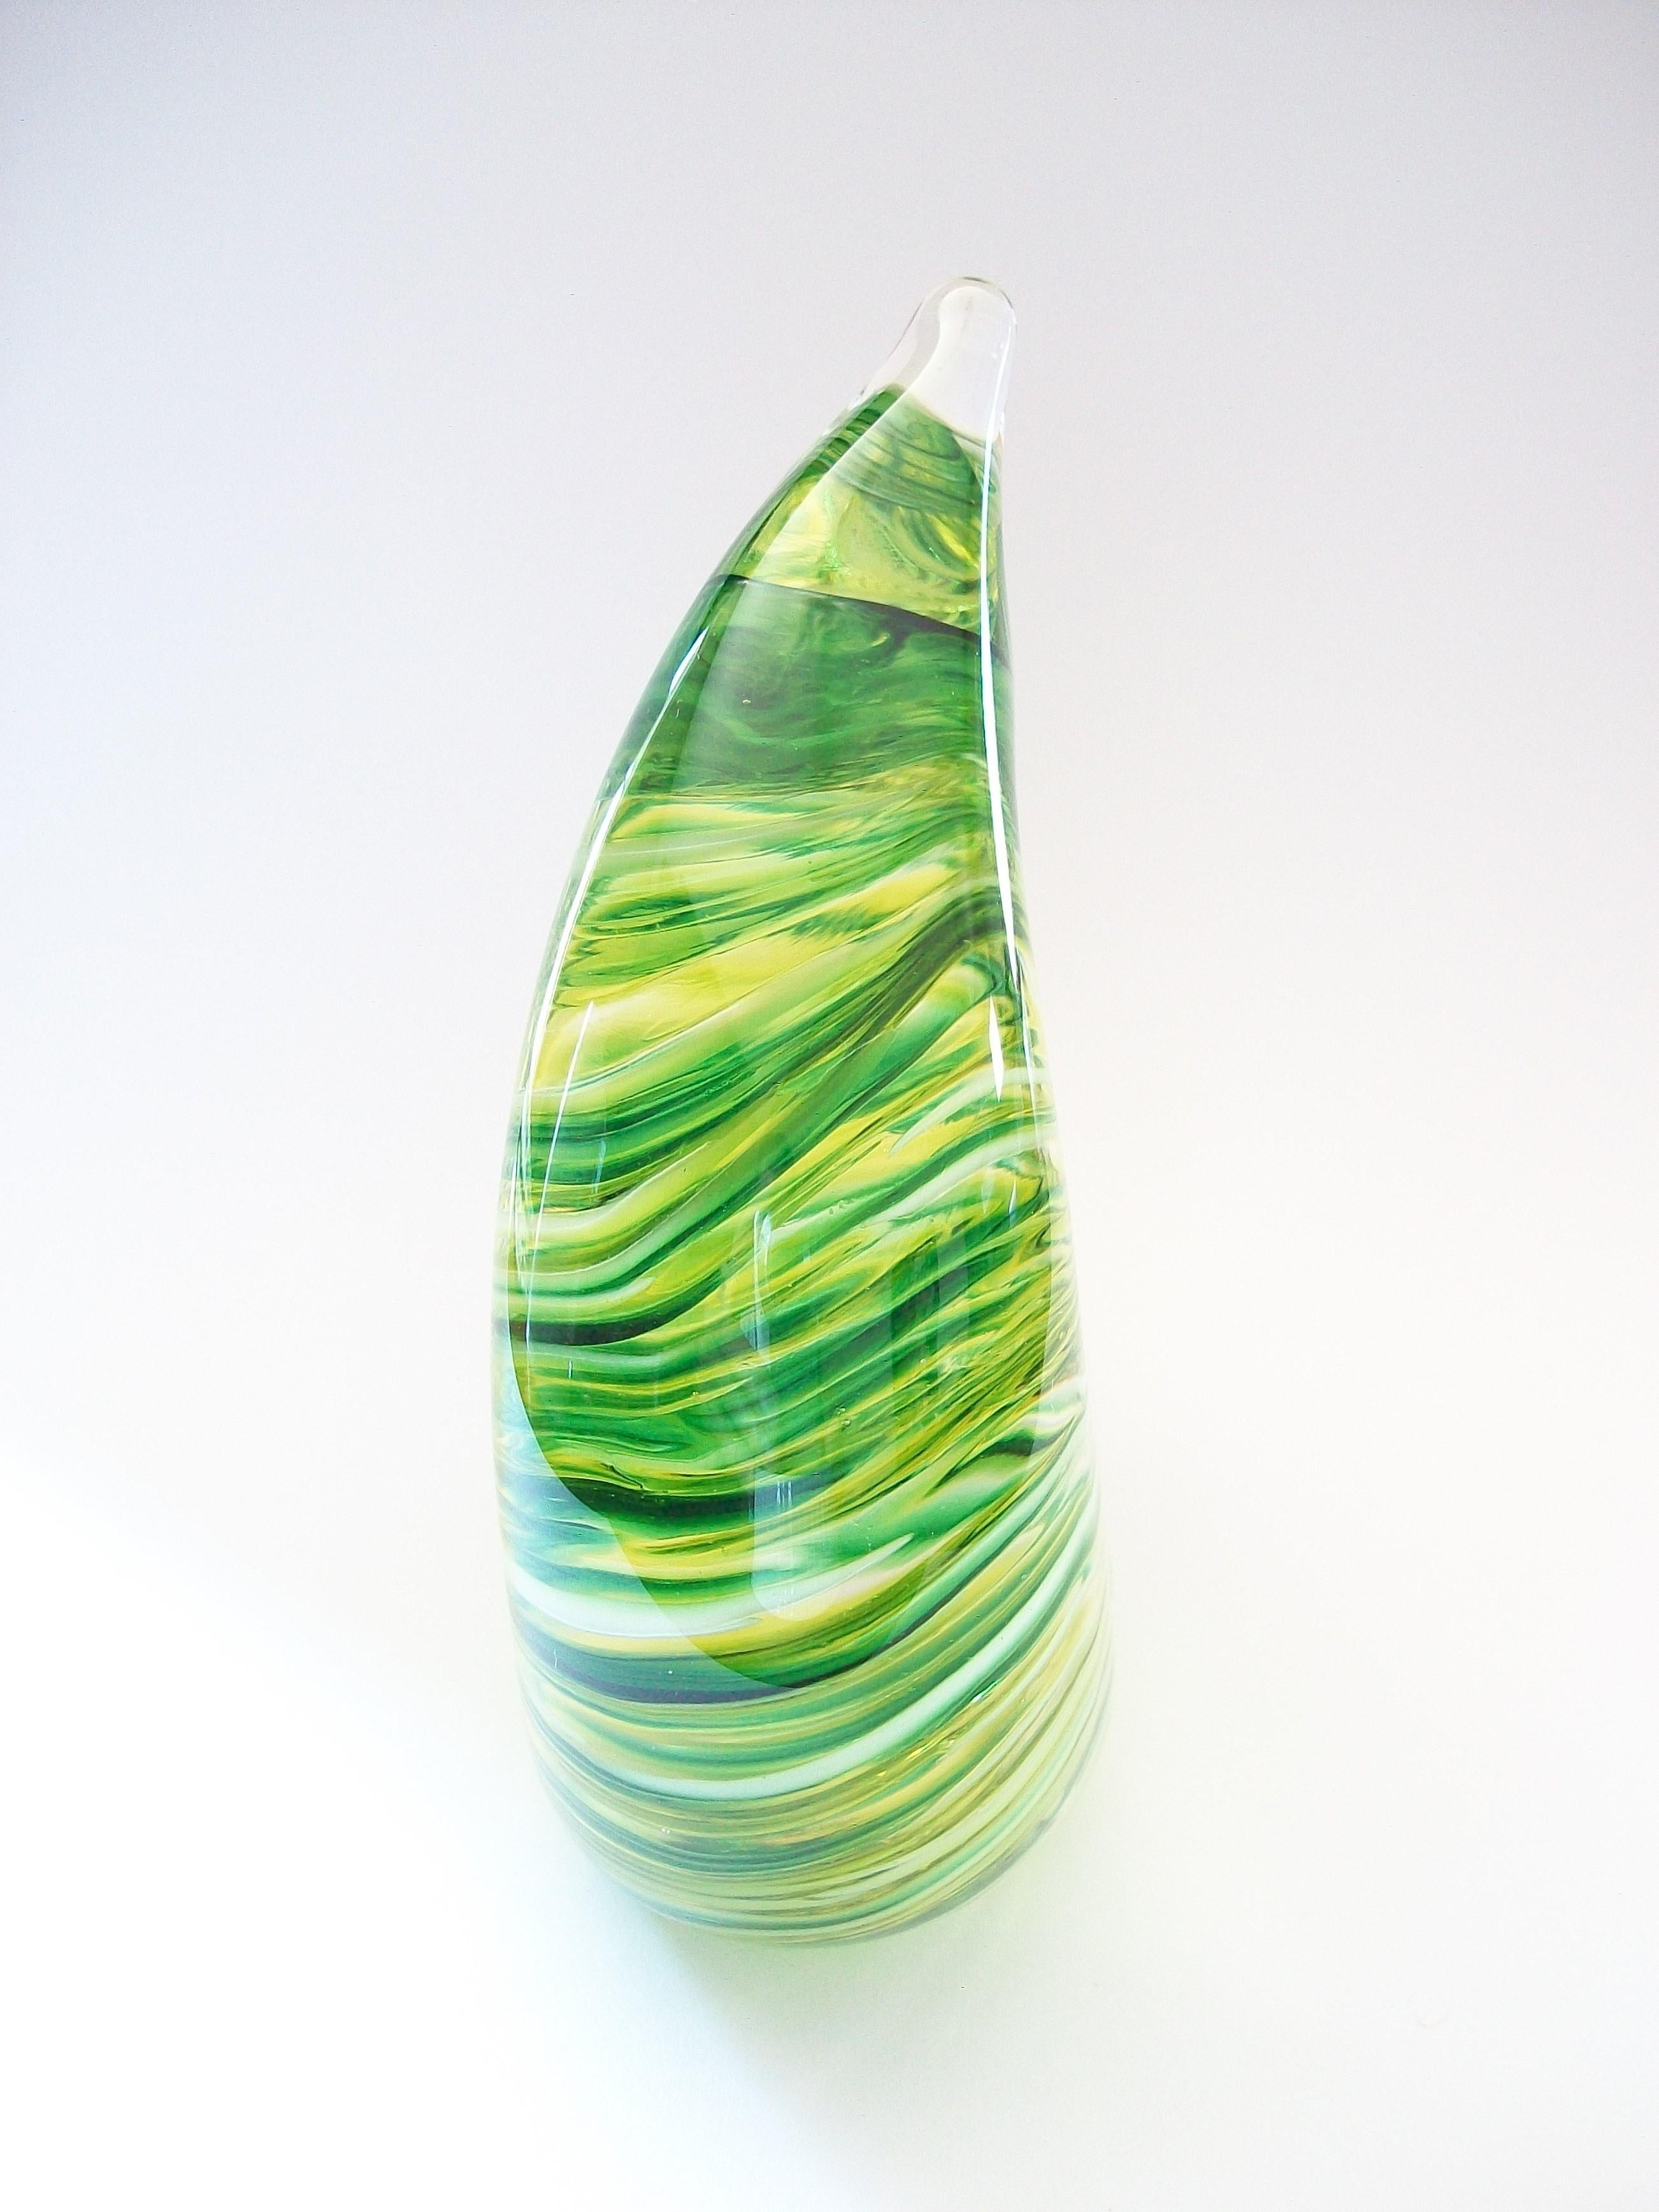 Hand-Crafted Contemporary Teardrop Glass Paperweight, Signed, Canada, Circa 2012 For Sale